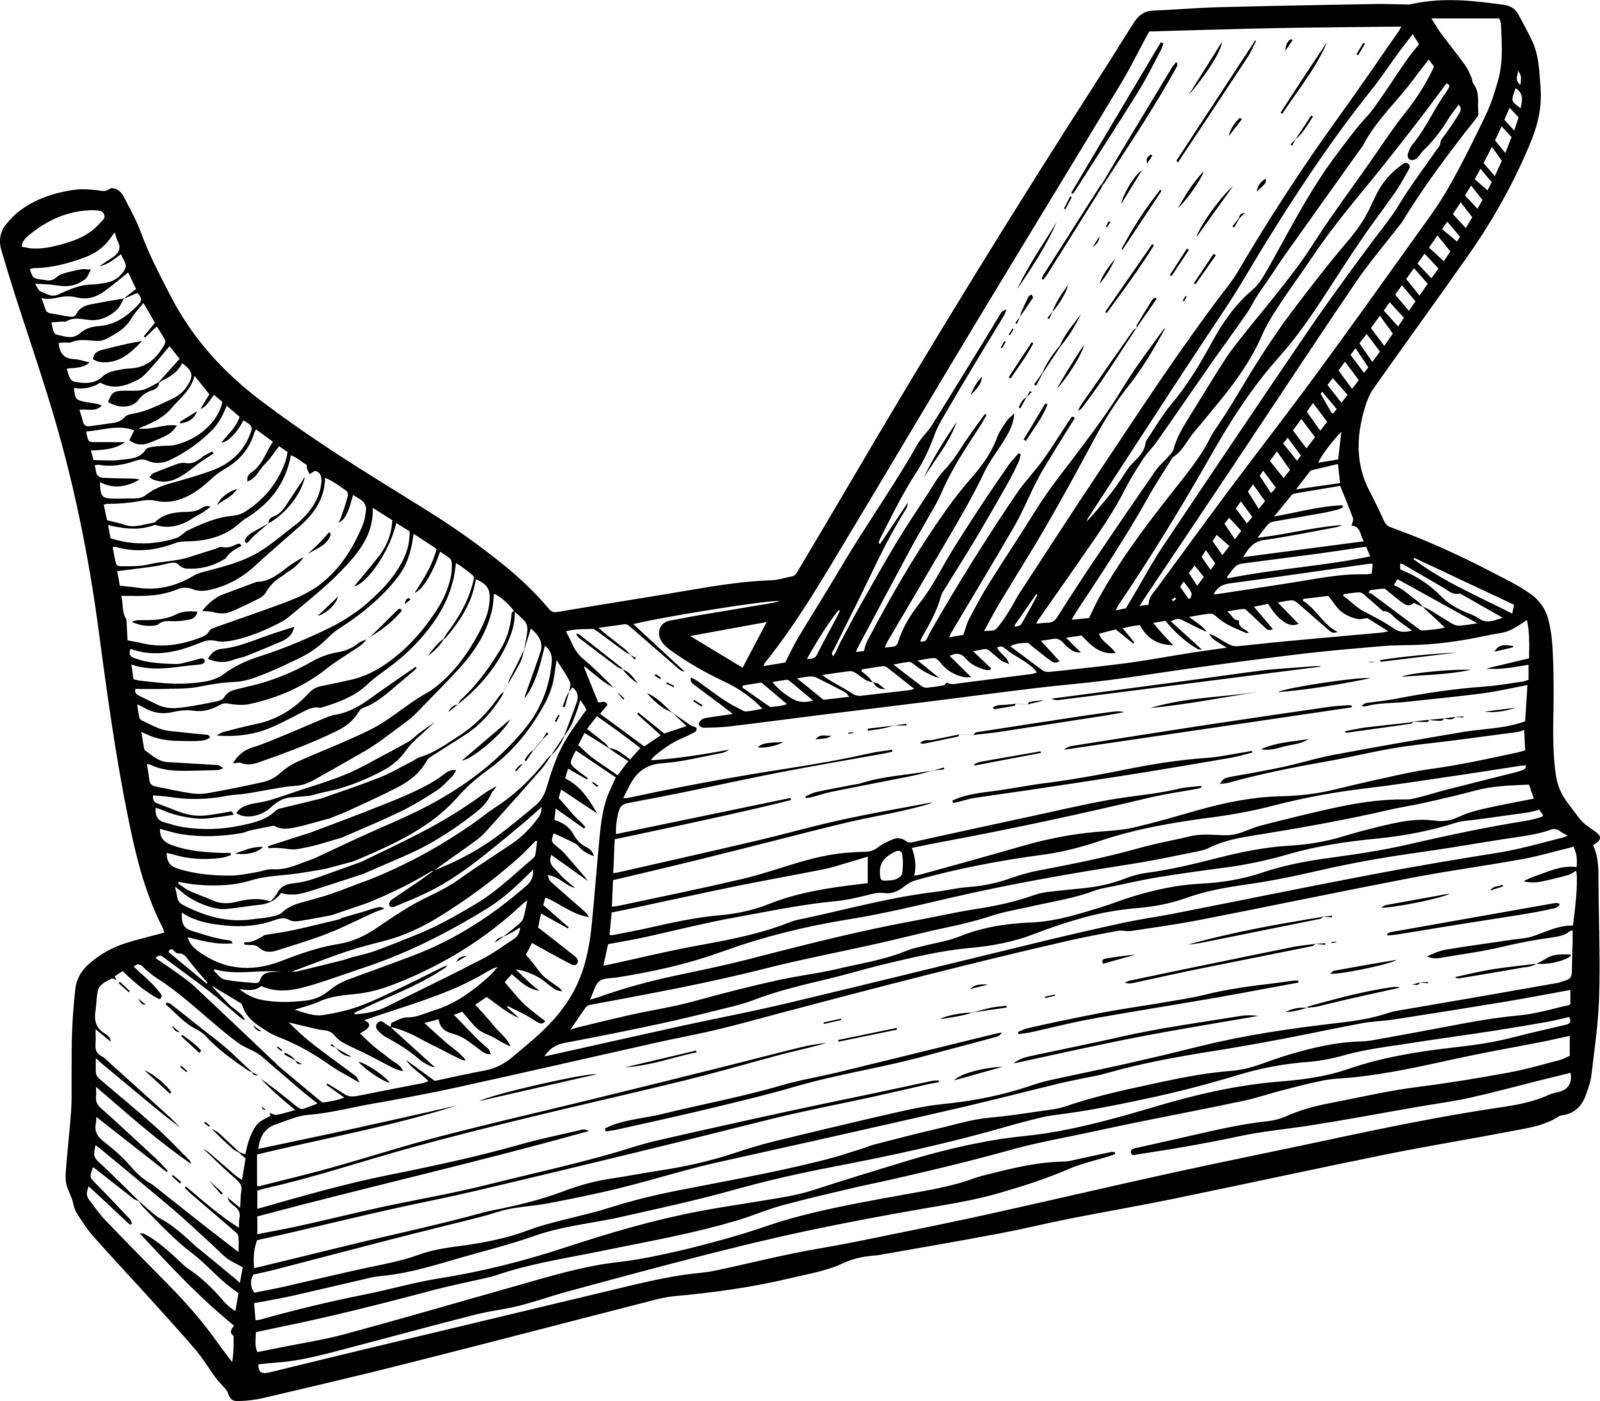 Wooden plane icon in sketch style. Woodworking tool vector illustration. by puruan